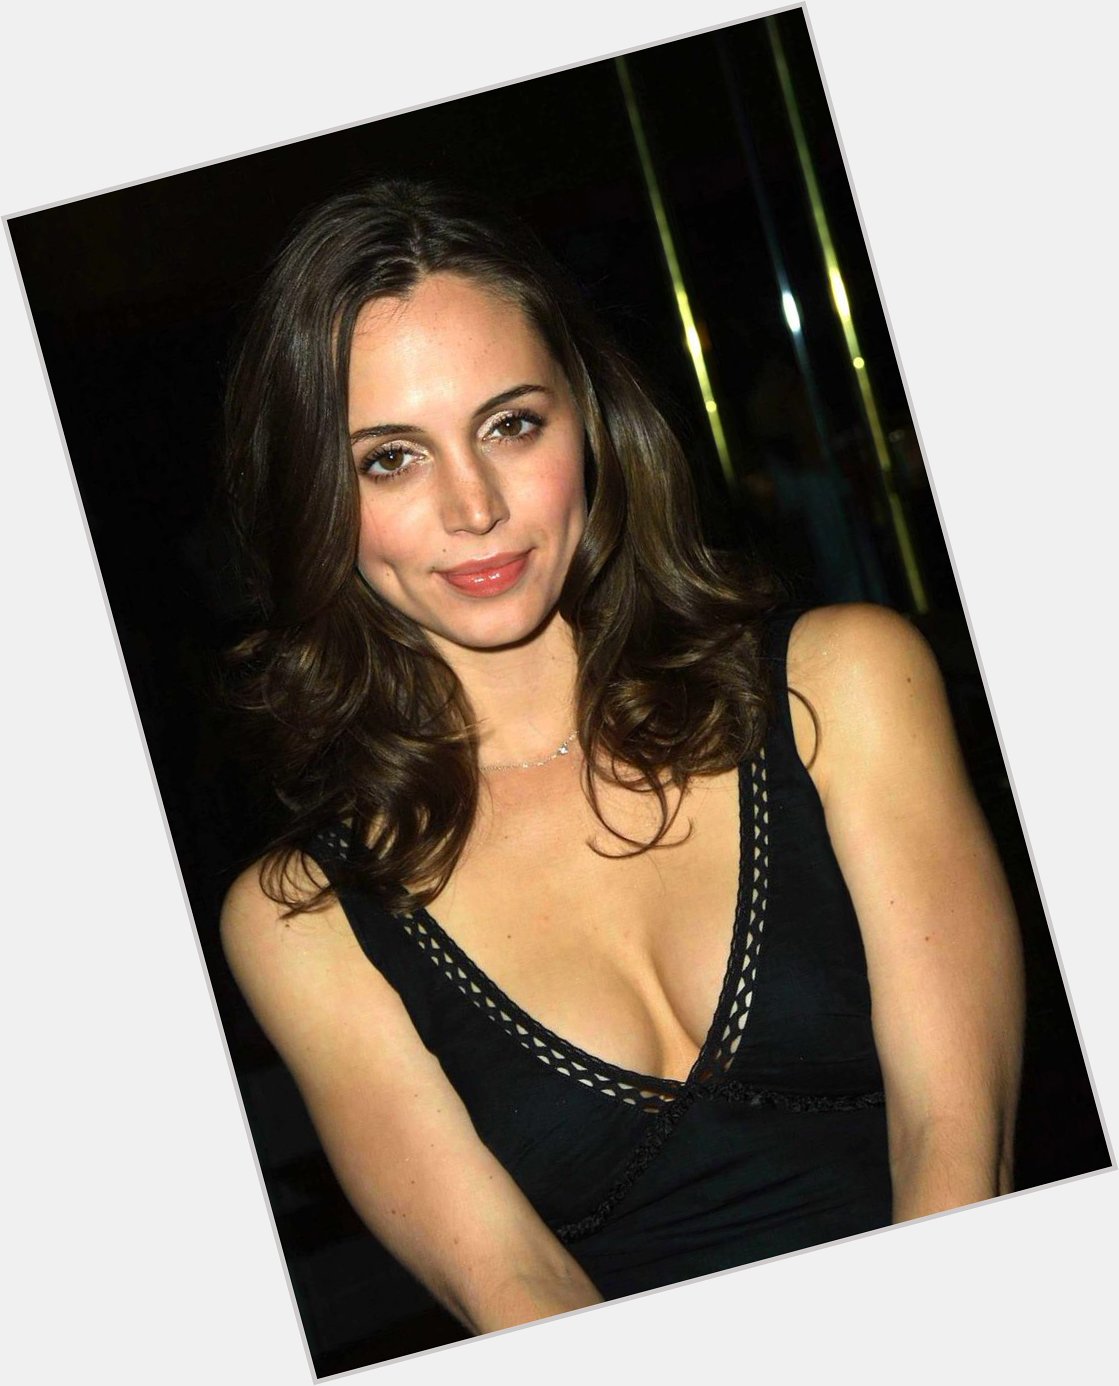 Can\t believe Faith from Buffy the Vampire Slayer is turning 40!! Happy Birthday Eliza Dushku!!! 